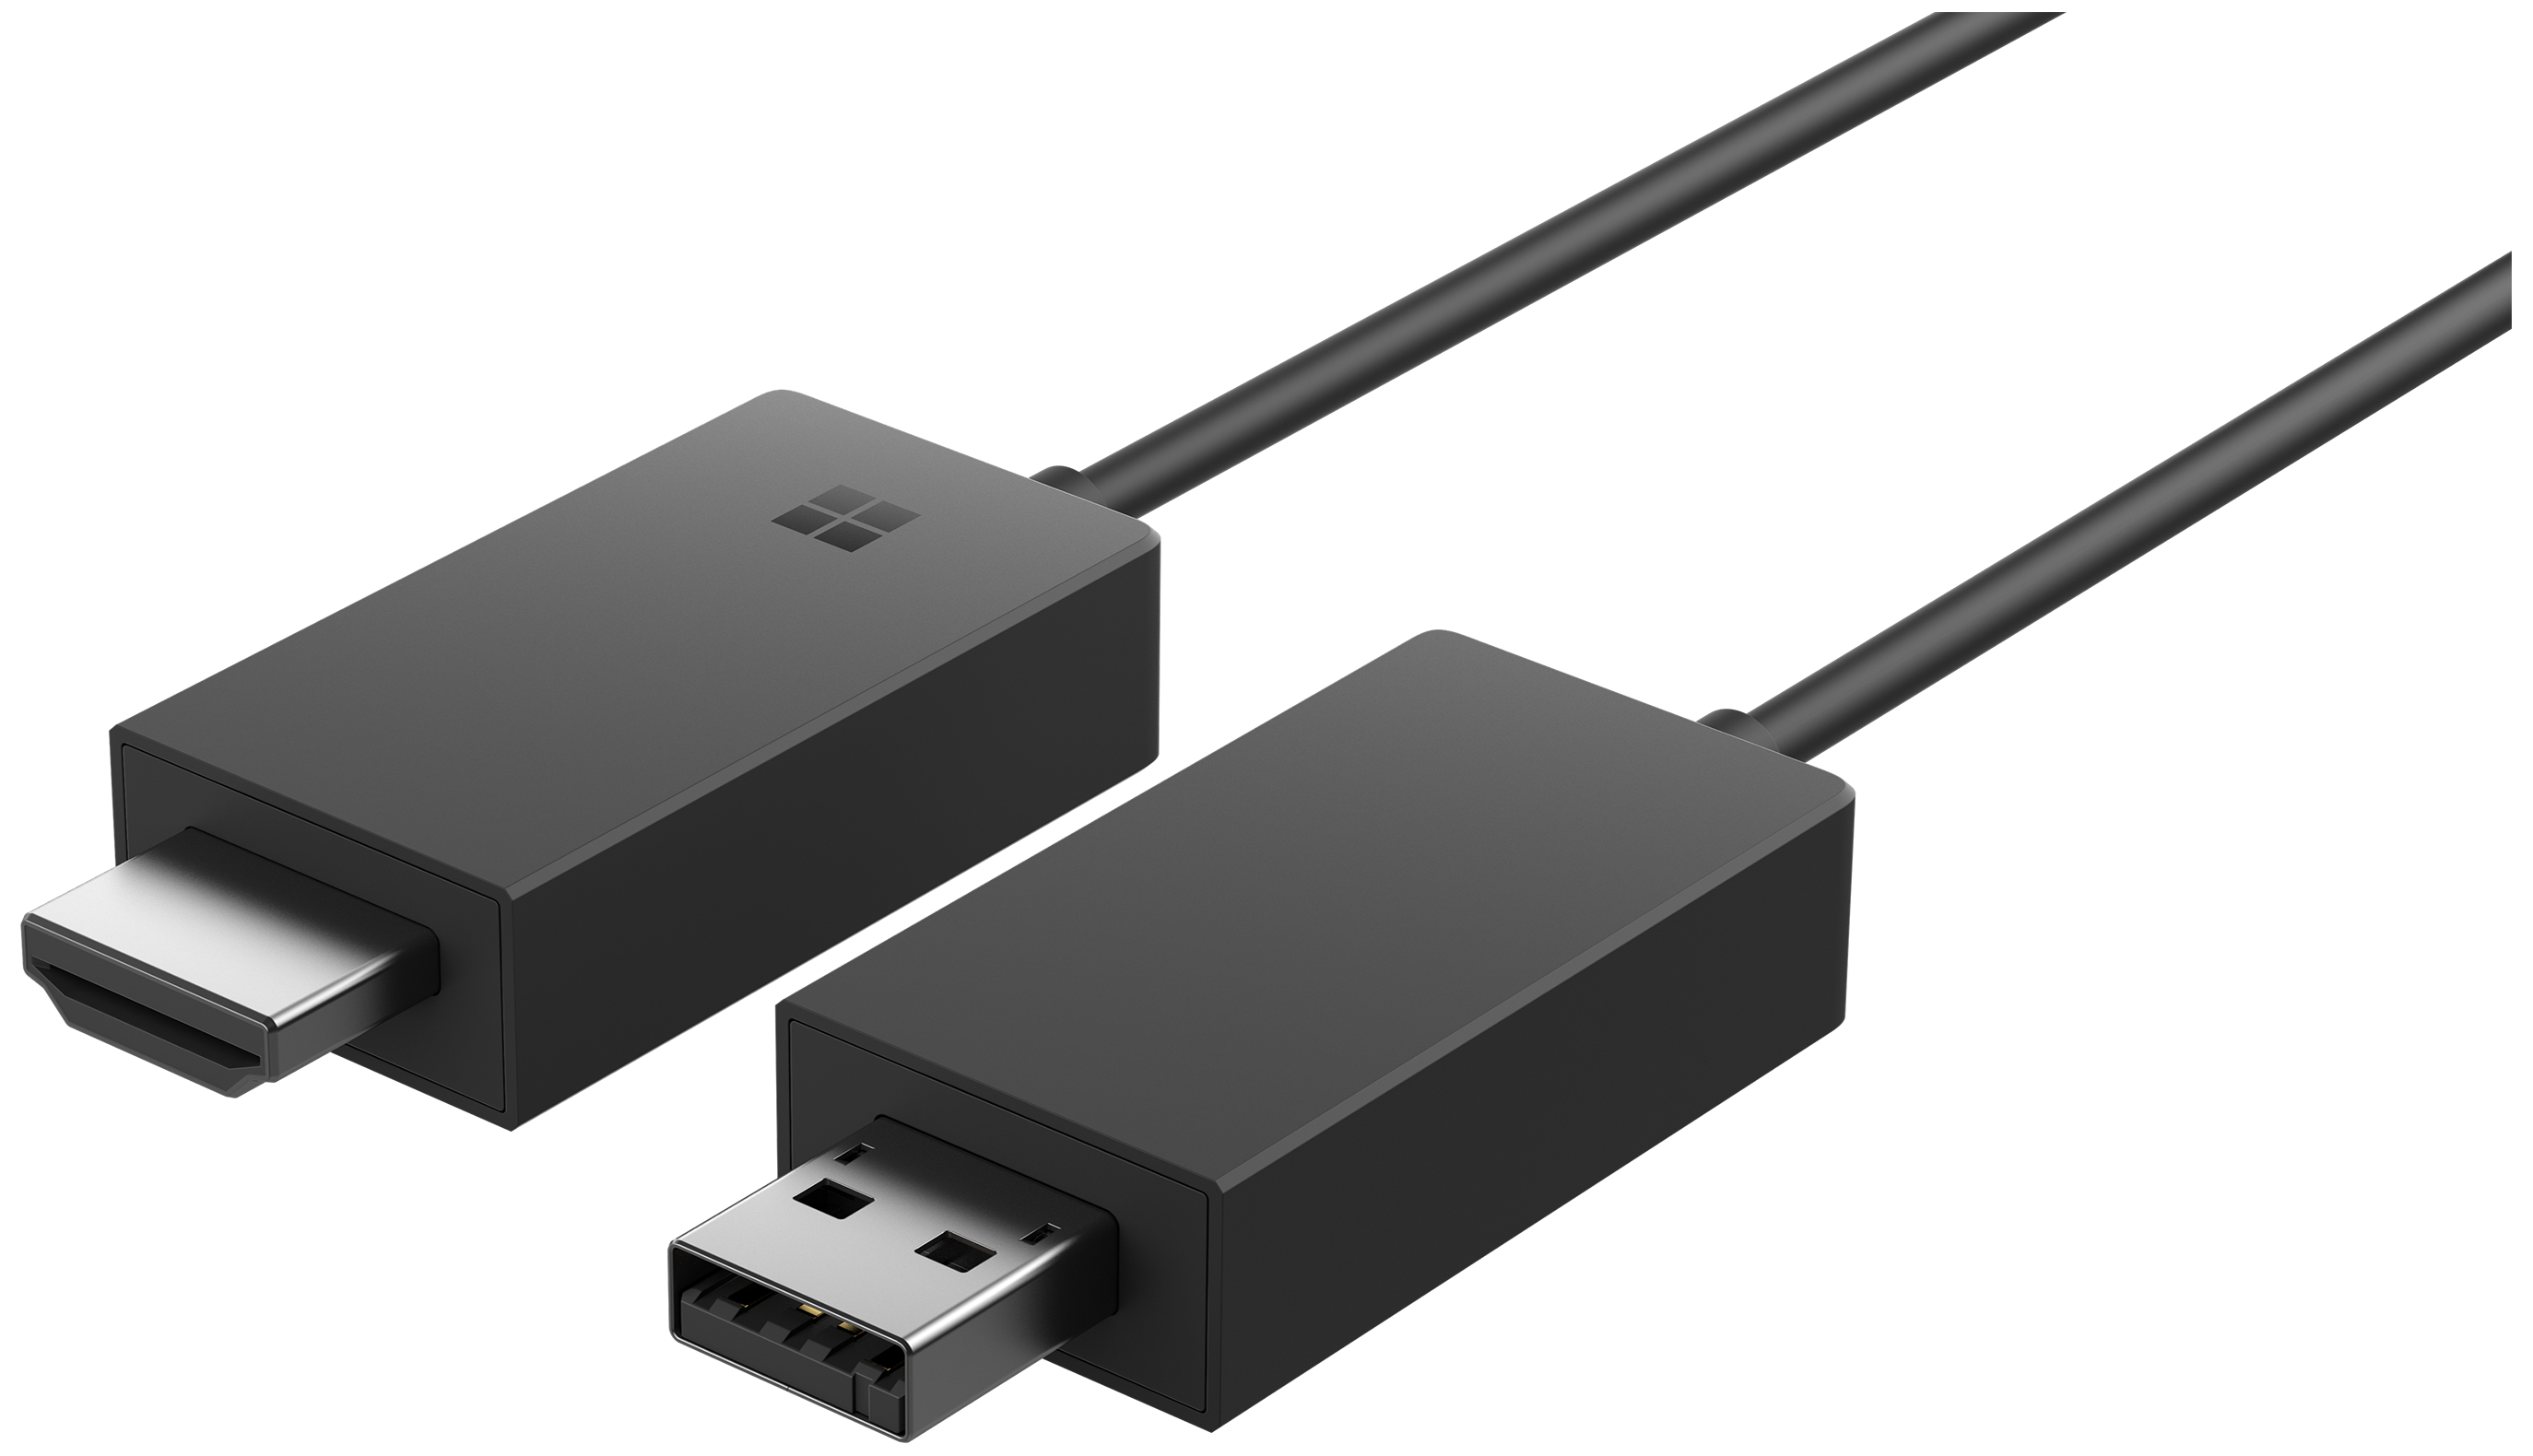 Connecting To Microsoft Wireless Display Adapter On Mac